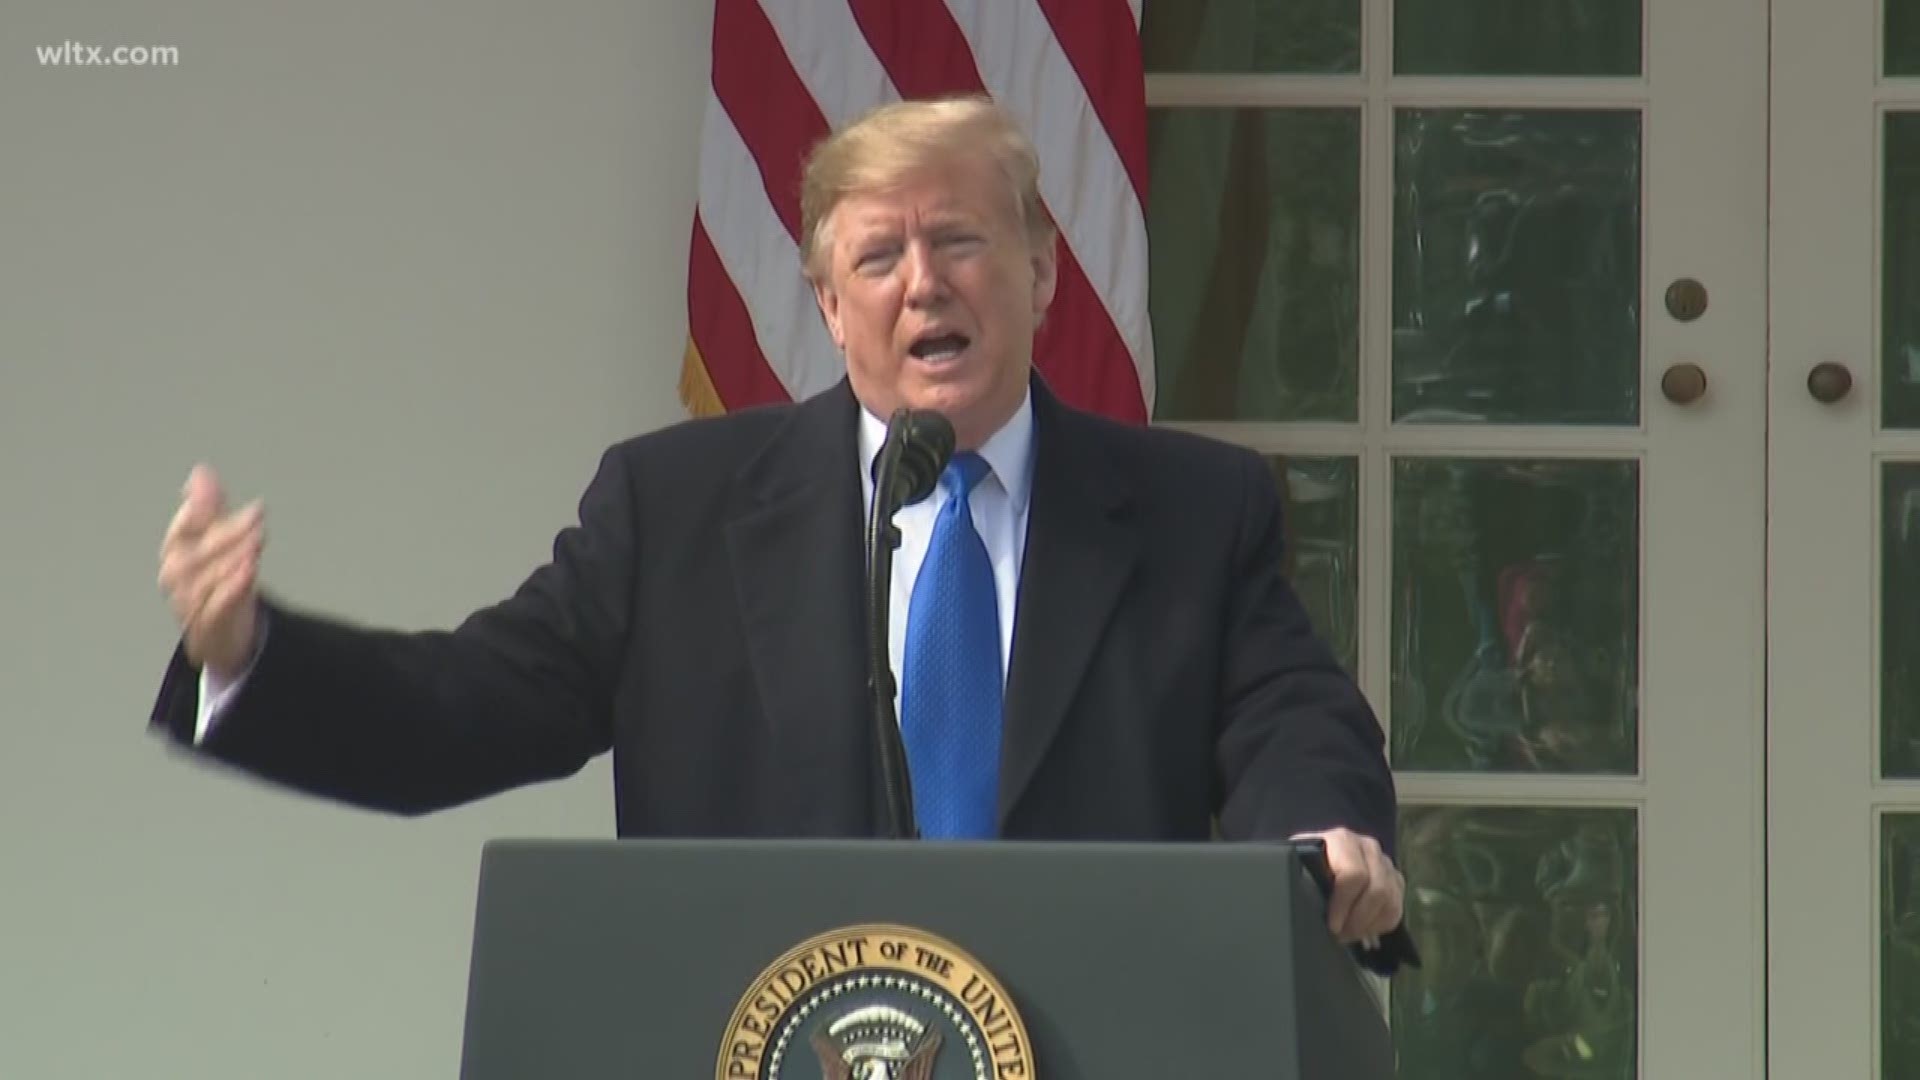 President Donald Trump has declared a national emergency about the southern border, saying there's an invasion of drugs and criminals. The declaration will give him the authority to spend billions on construction of a border wall.